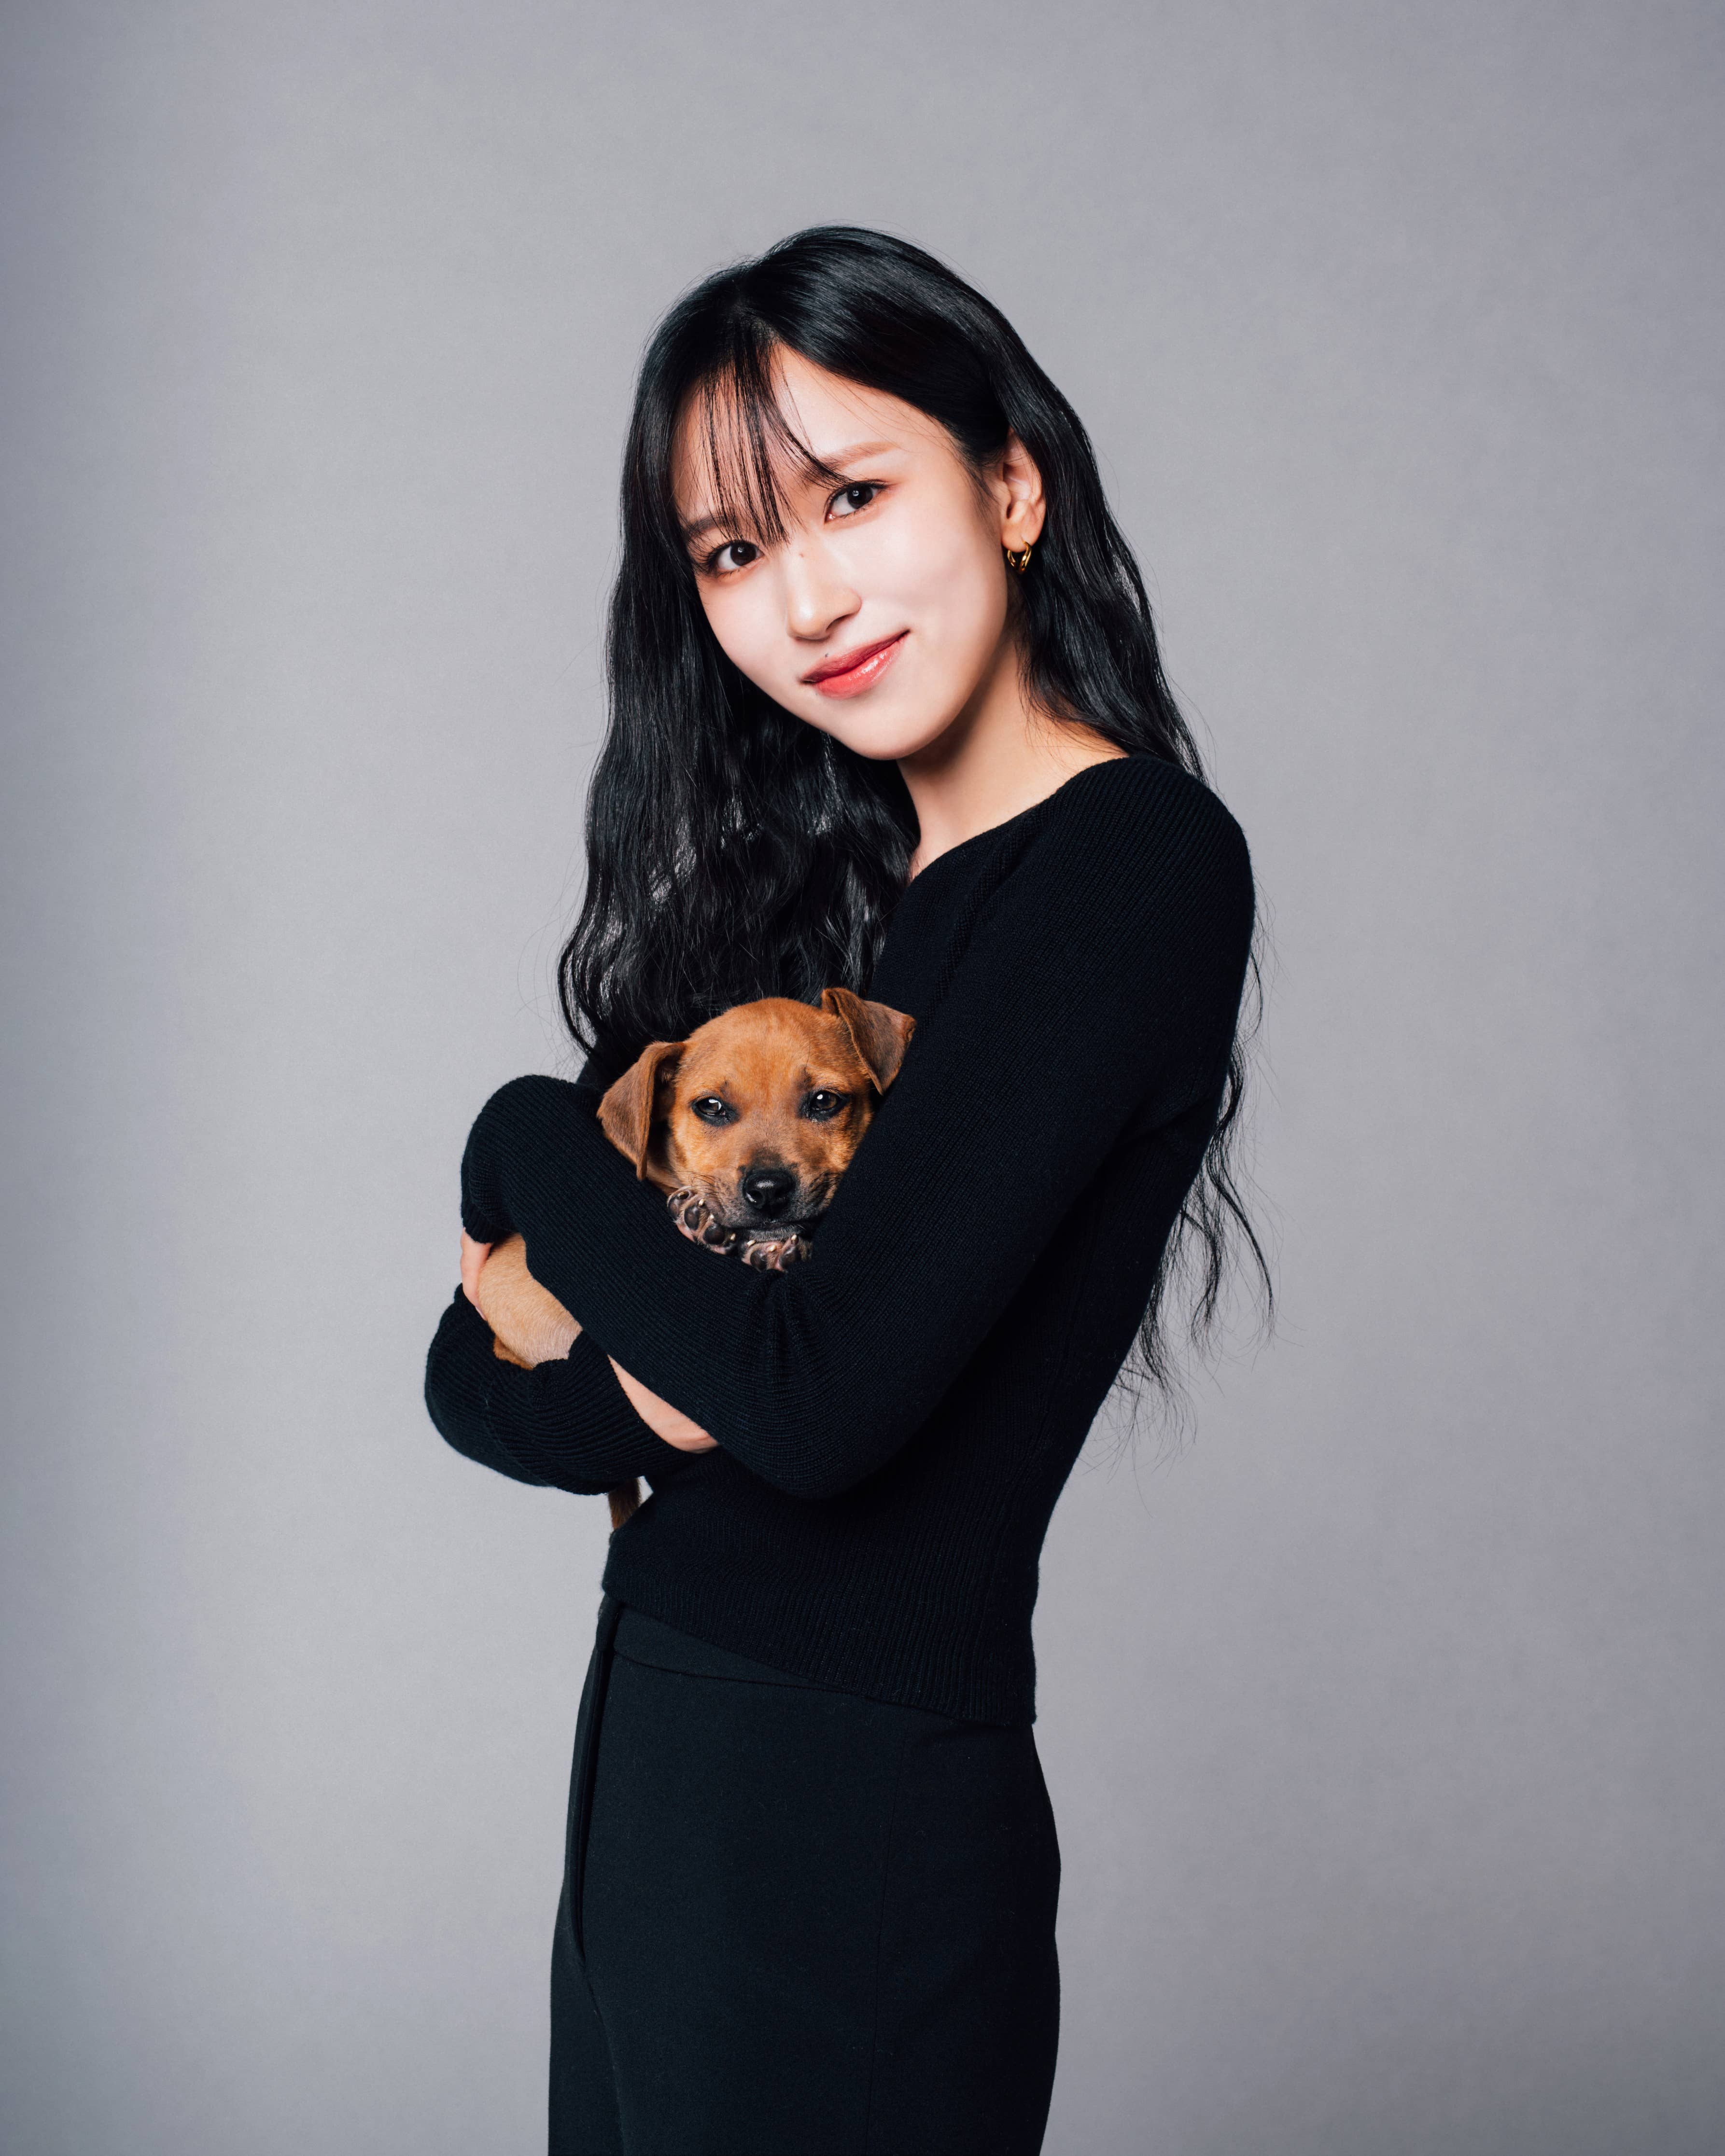 Woman in a black outfit smiling, holding a small puppy against a neutral background